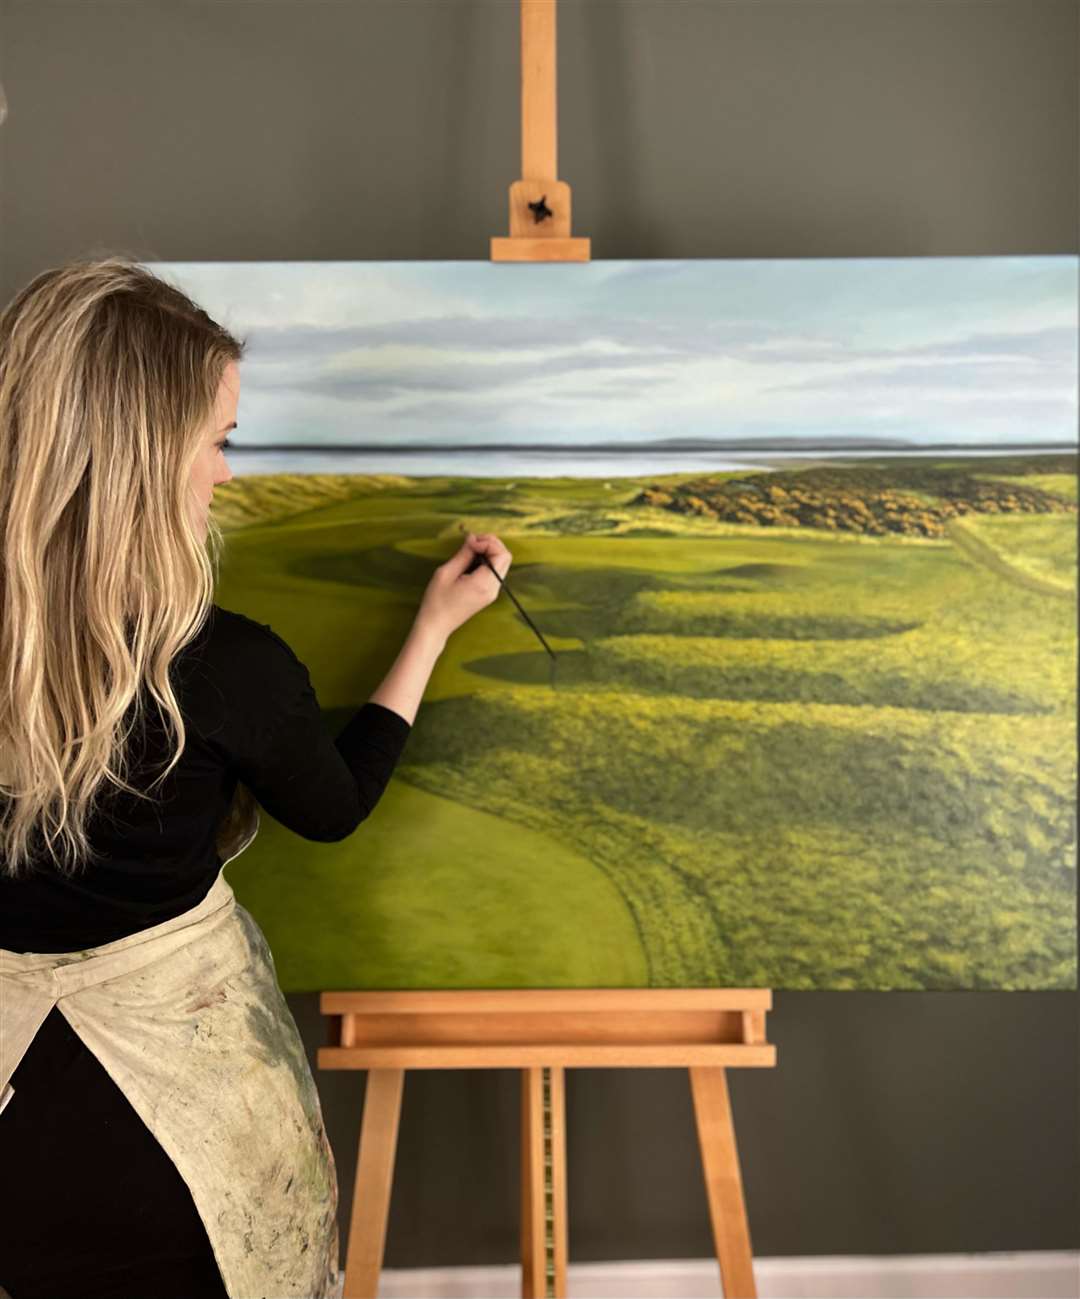 Aimee Smith's first Royal Dornoch landscape features 'Foxy' - the 14th hole of the championship course.